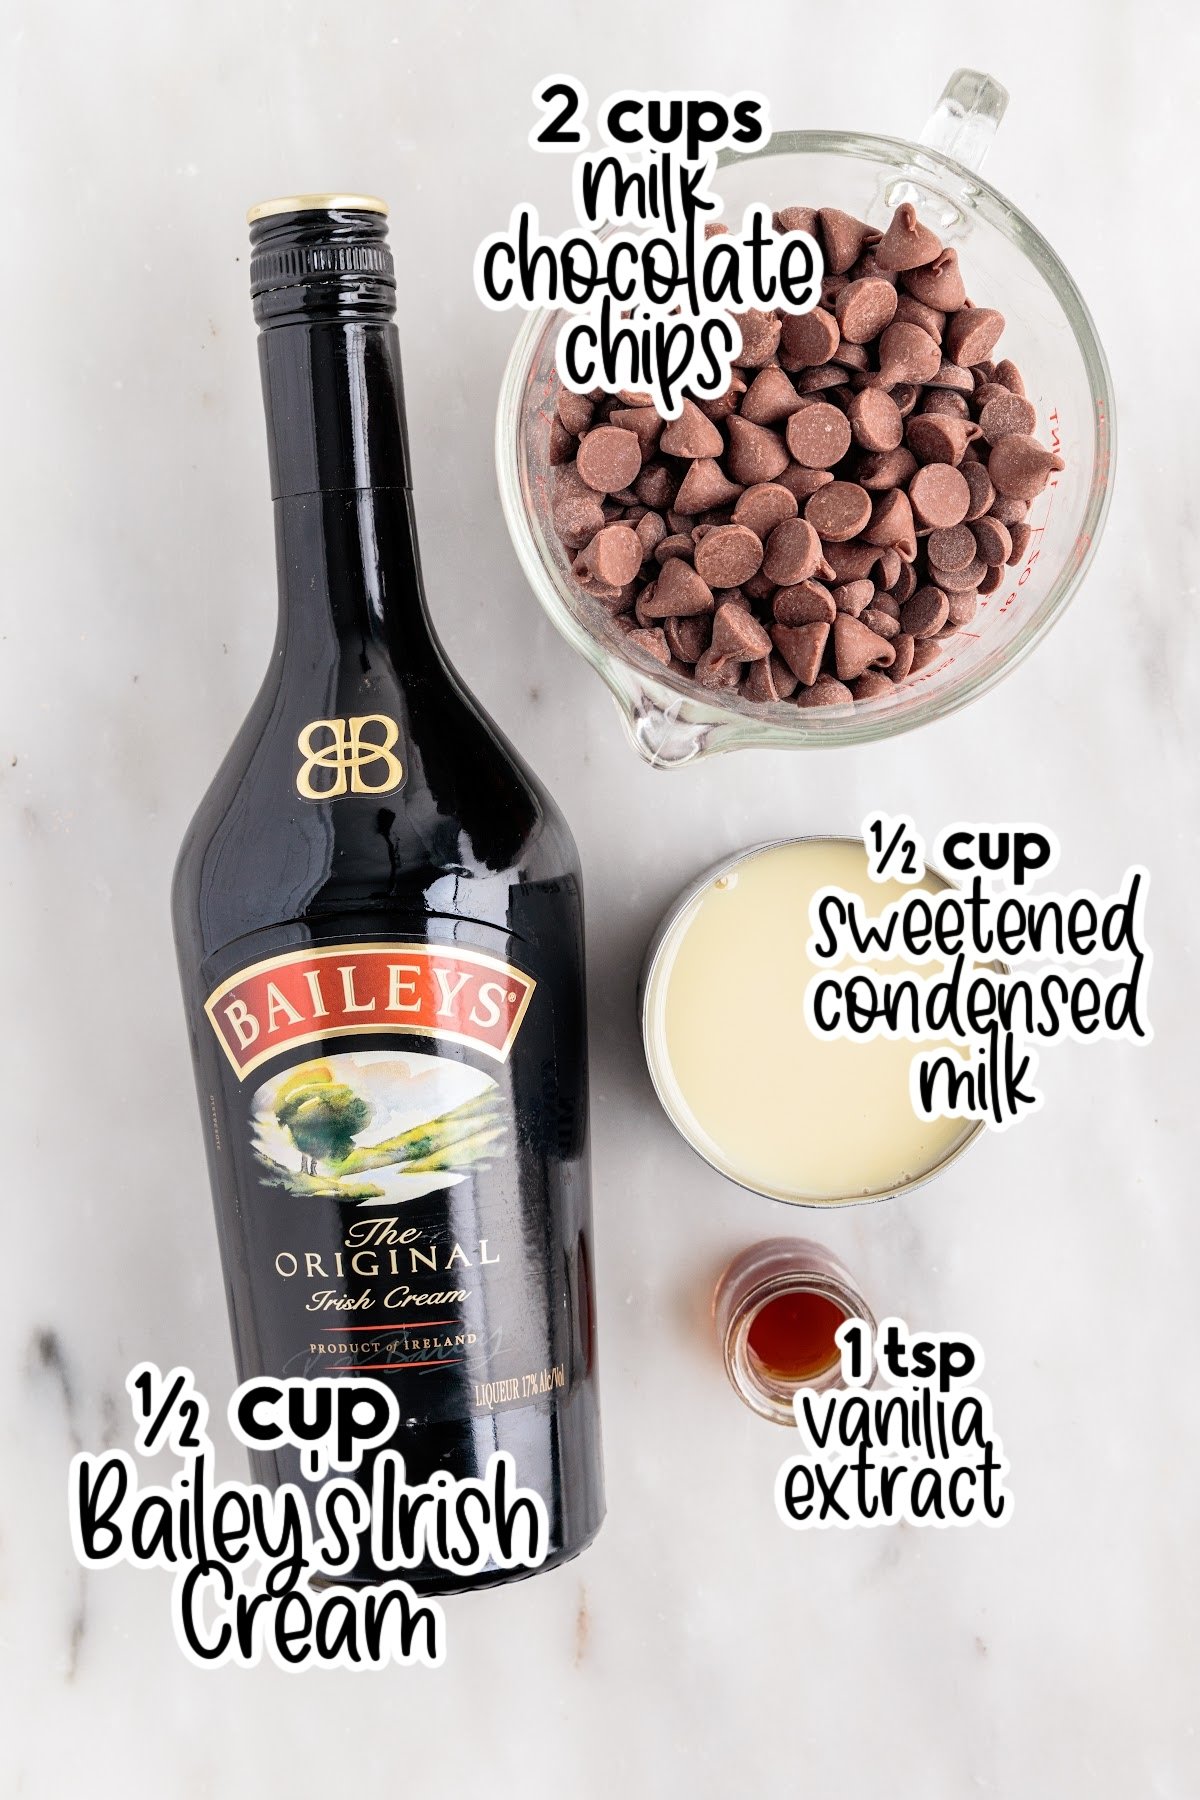 Bottle of Bailey's Irish cream liqueur, bowl of chocolate chips, can of sweetened condensed milk and jar of vanilla extract with text labels.